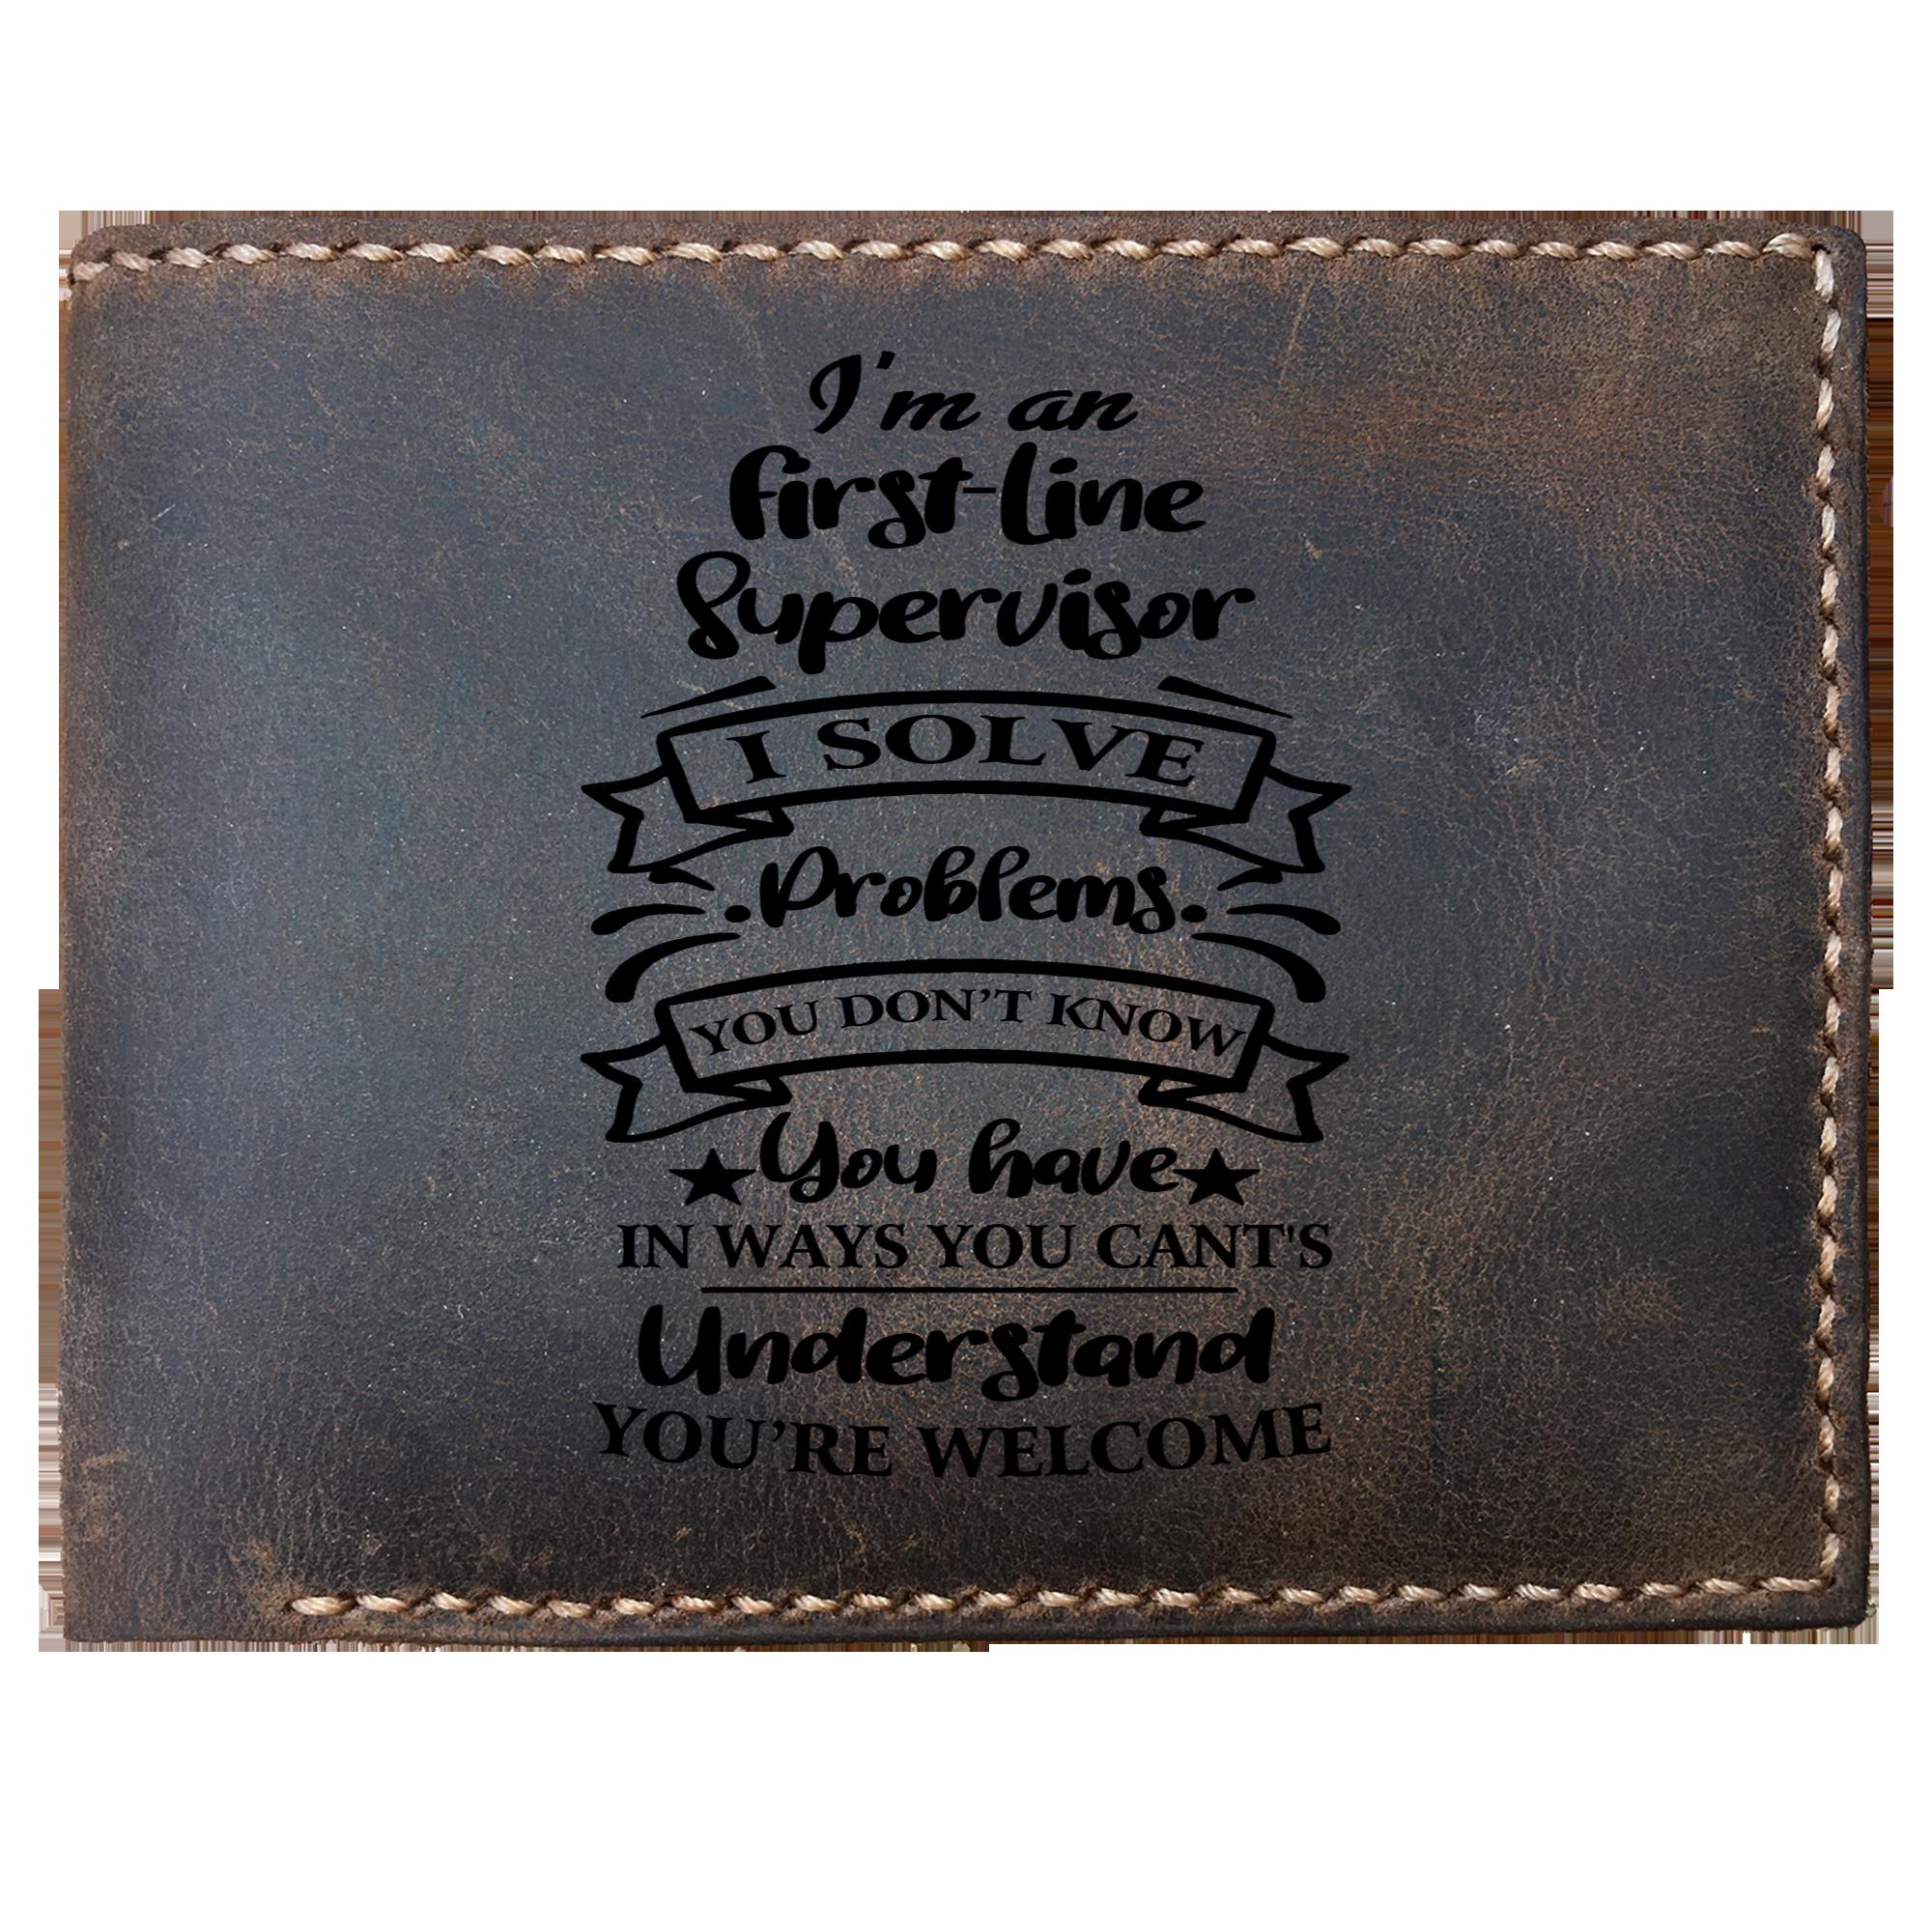 Skitongifts Funny Custom Laser Engraved Bifold Leather Wallet For Men, I'm an First-Line Supervisor Solve Problems, Father's Day Gifts